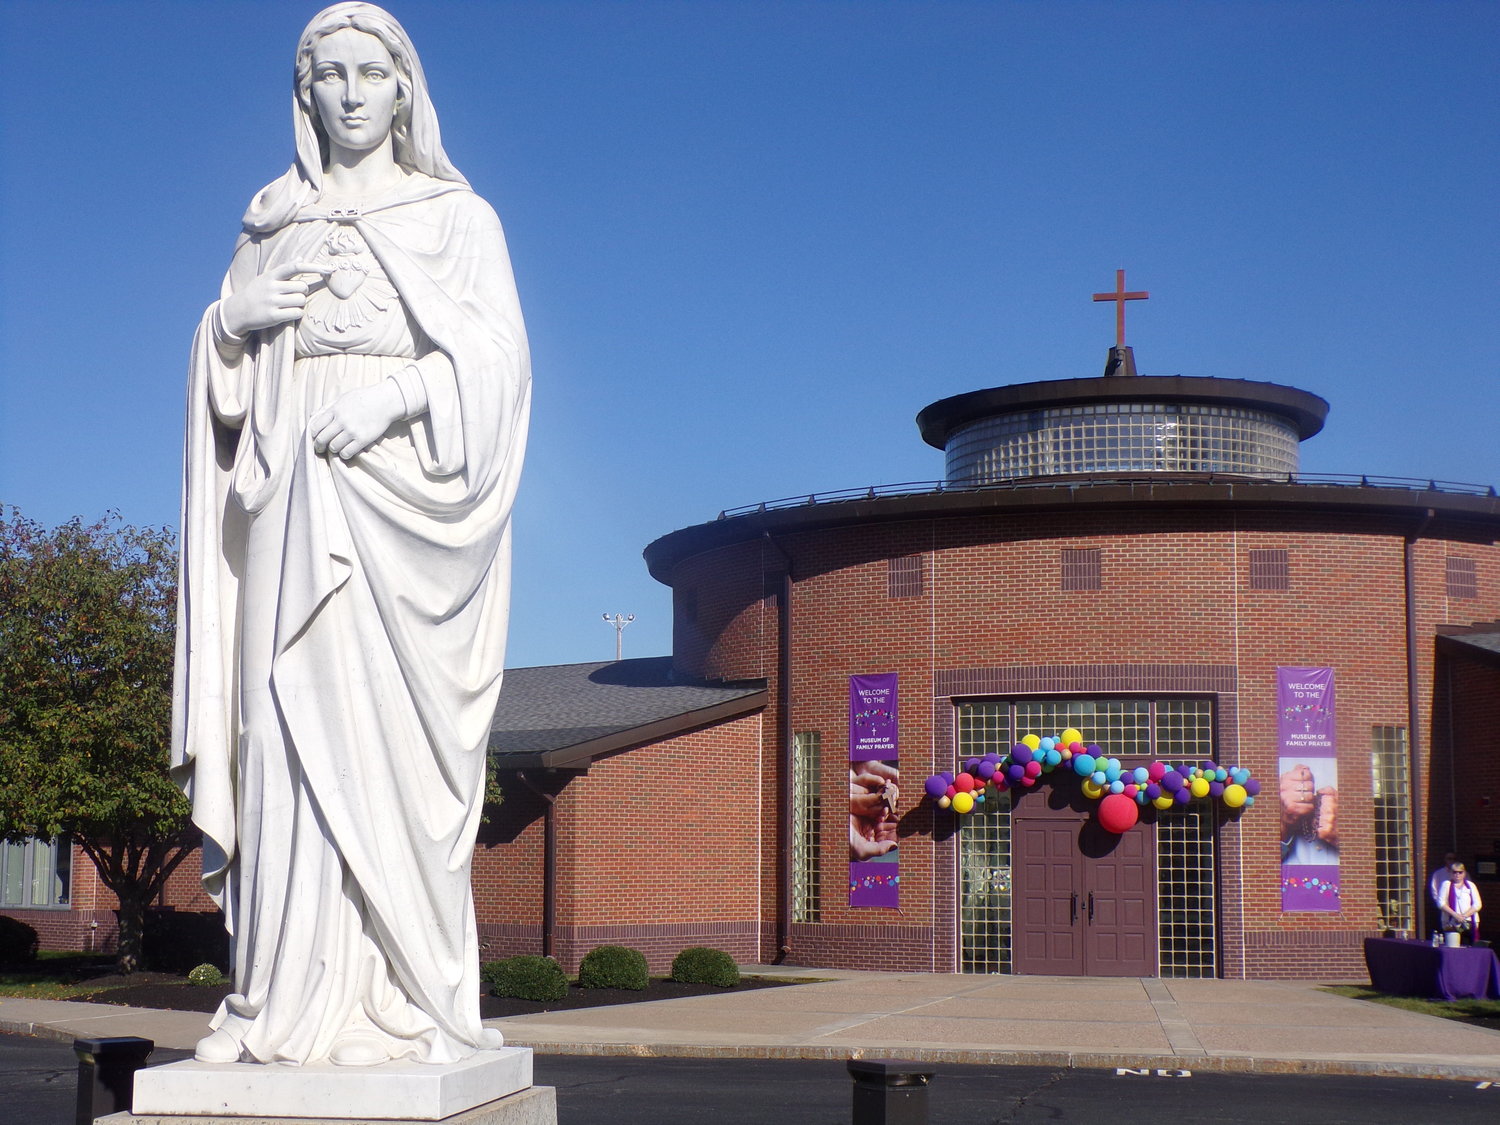 A statue of the Blessed Mother is a welcoming sight at the new Museum of Family Prayer at Holy Cross Family Ministries’ headquarters in Easton, Massachusetts.